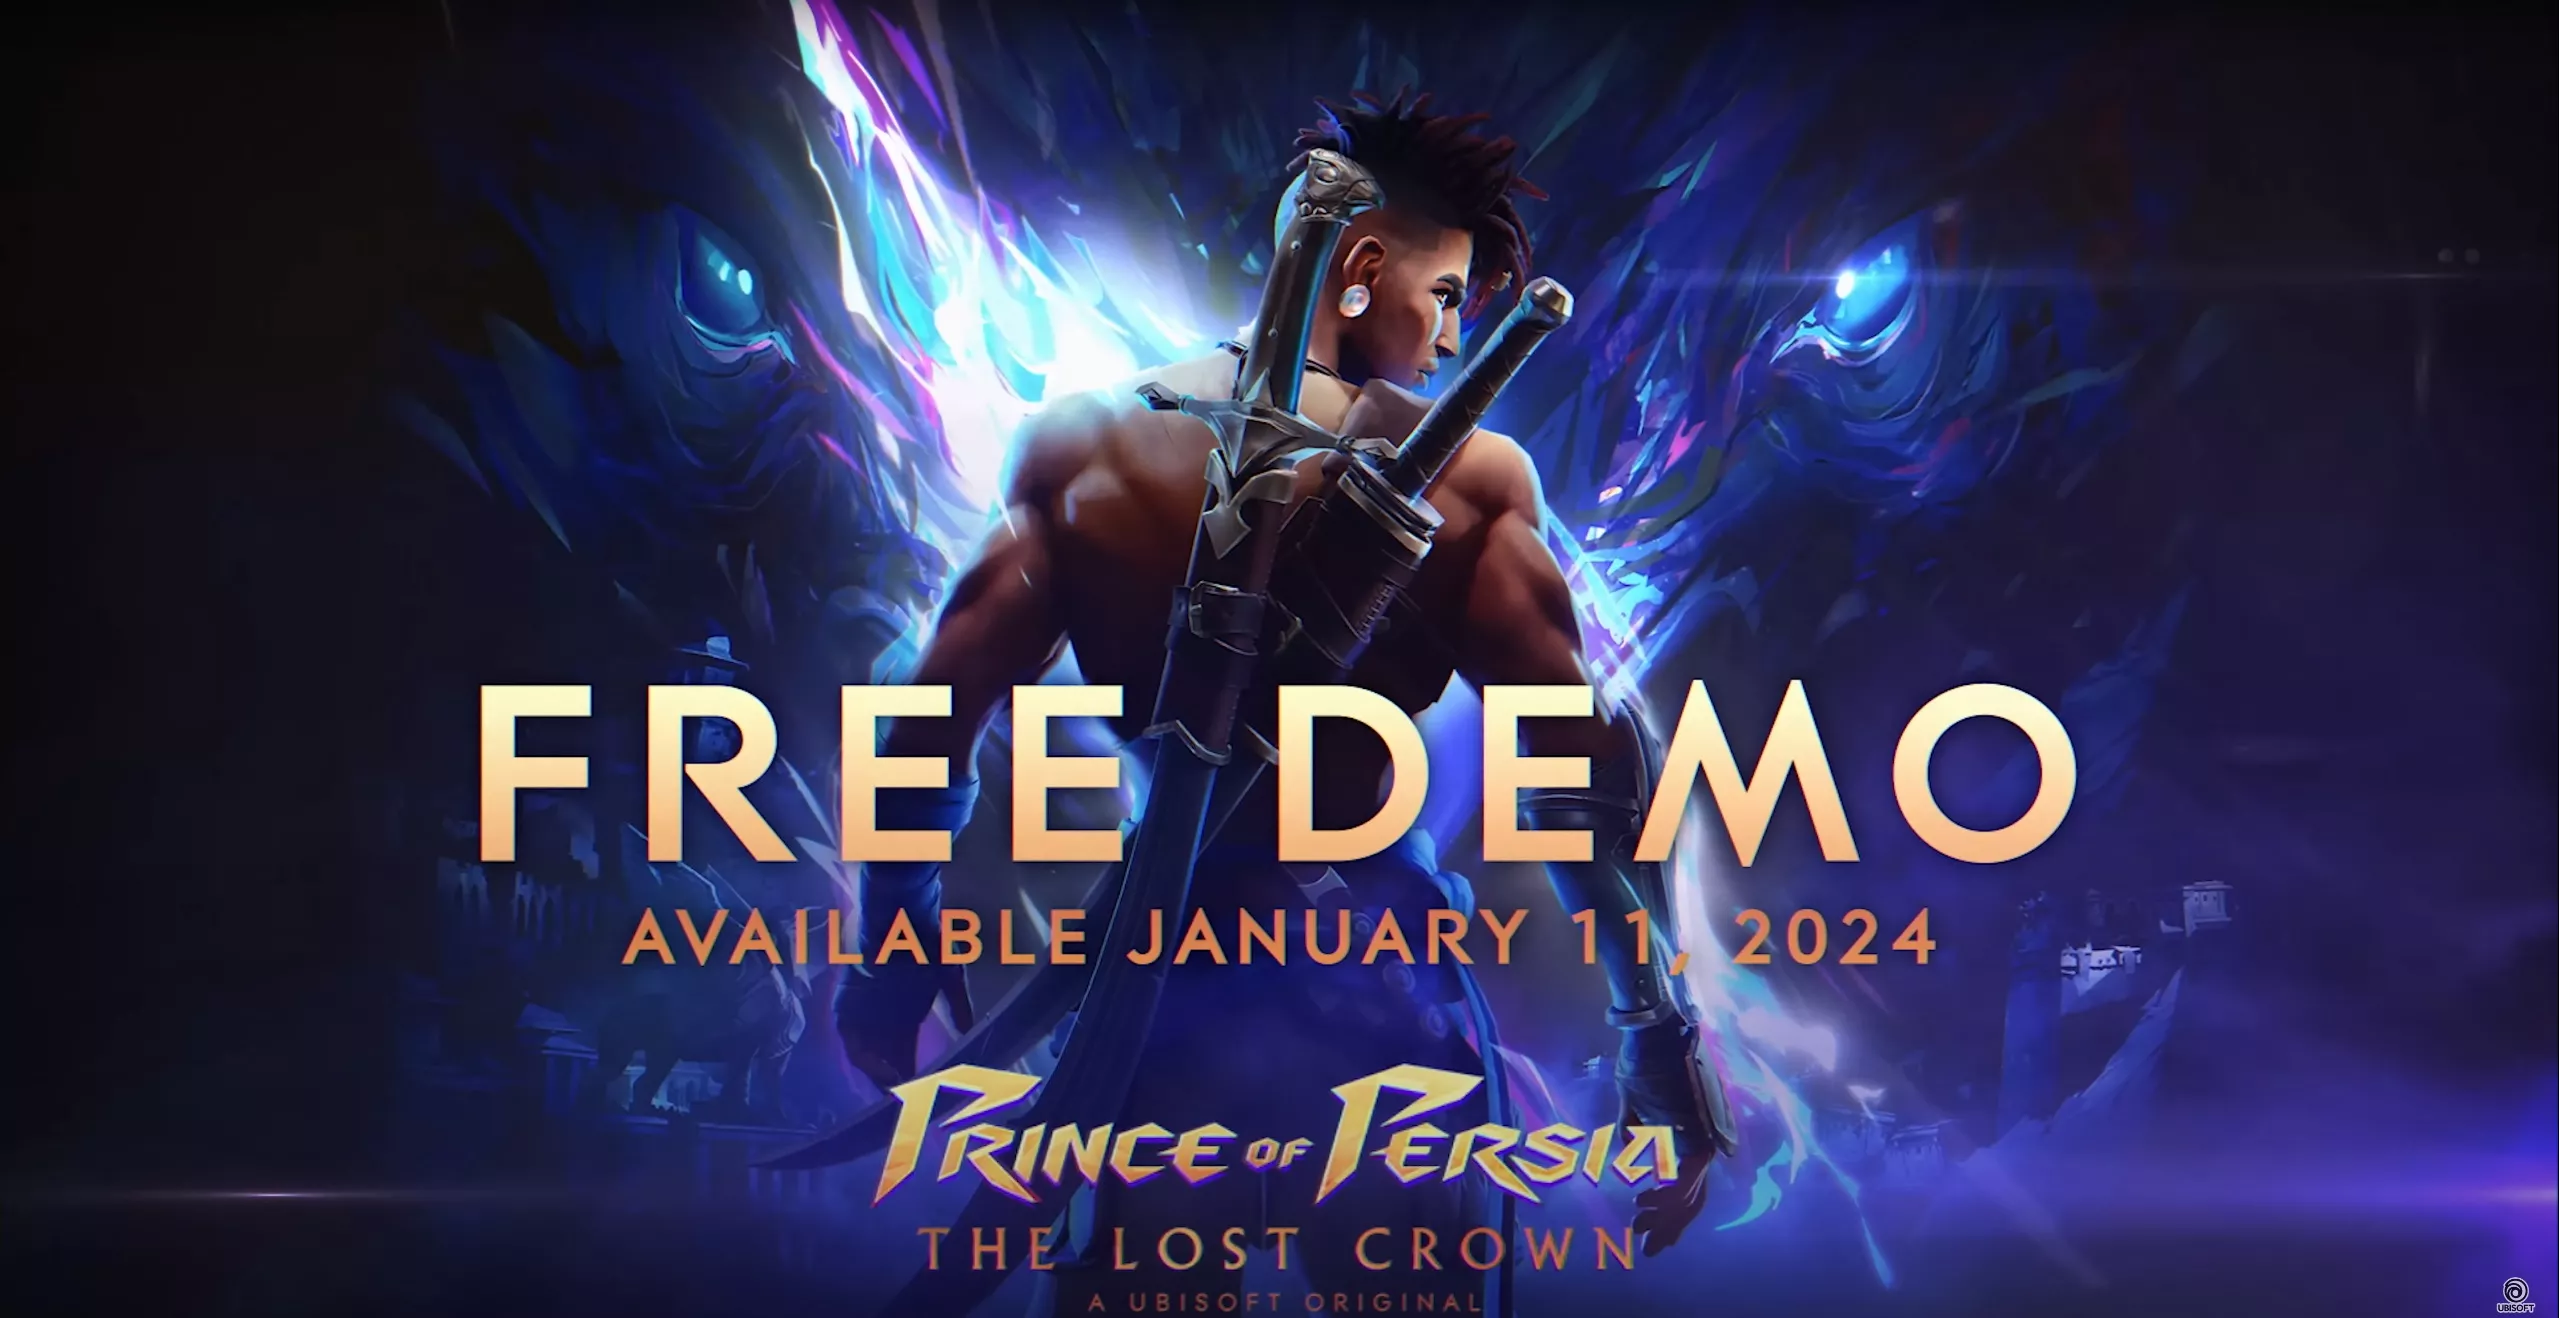 Story-Trailer zu Prince of Persia The Lost Crown Heropic